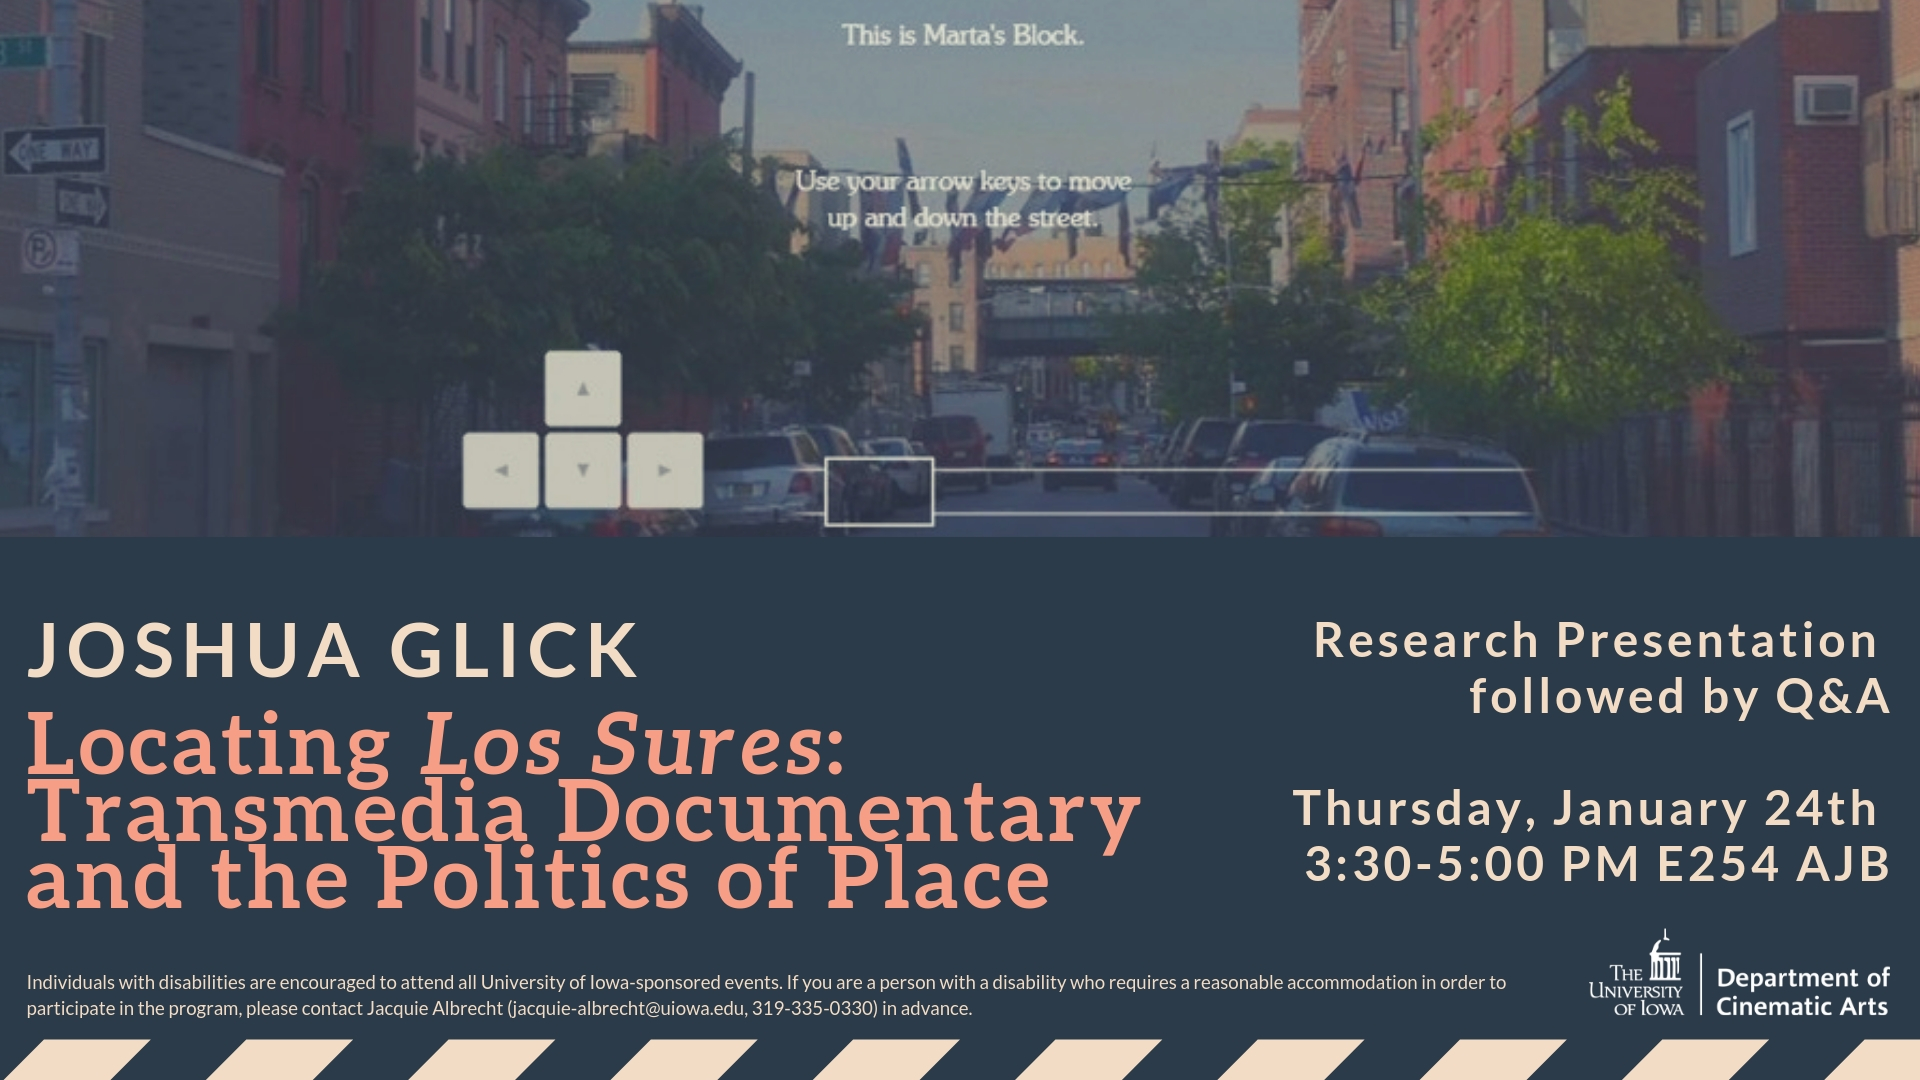 Joshua Glick - Locating Los Sures: Transmedia Documentary and the Politics of Place - Research Presentation   followed by Q&A    Thursday, January 24th   3:30-5:00 PM E254 AJB